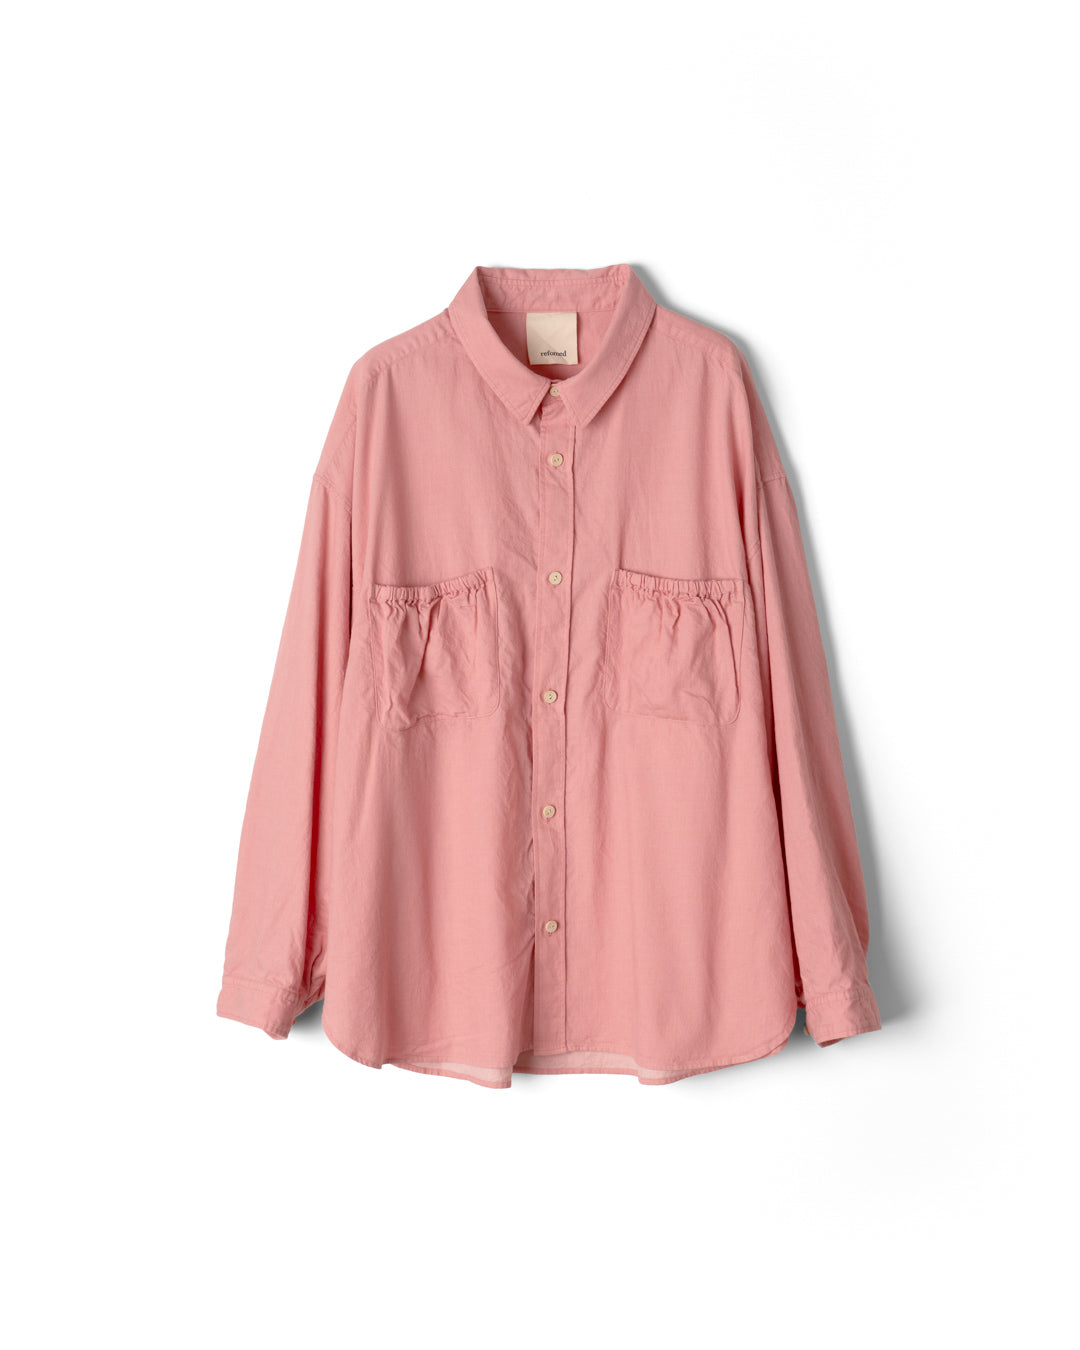 【REFOMED】WRIST PATCH WIDE SHIRT "CHAMBRAY" - PINK